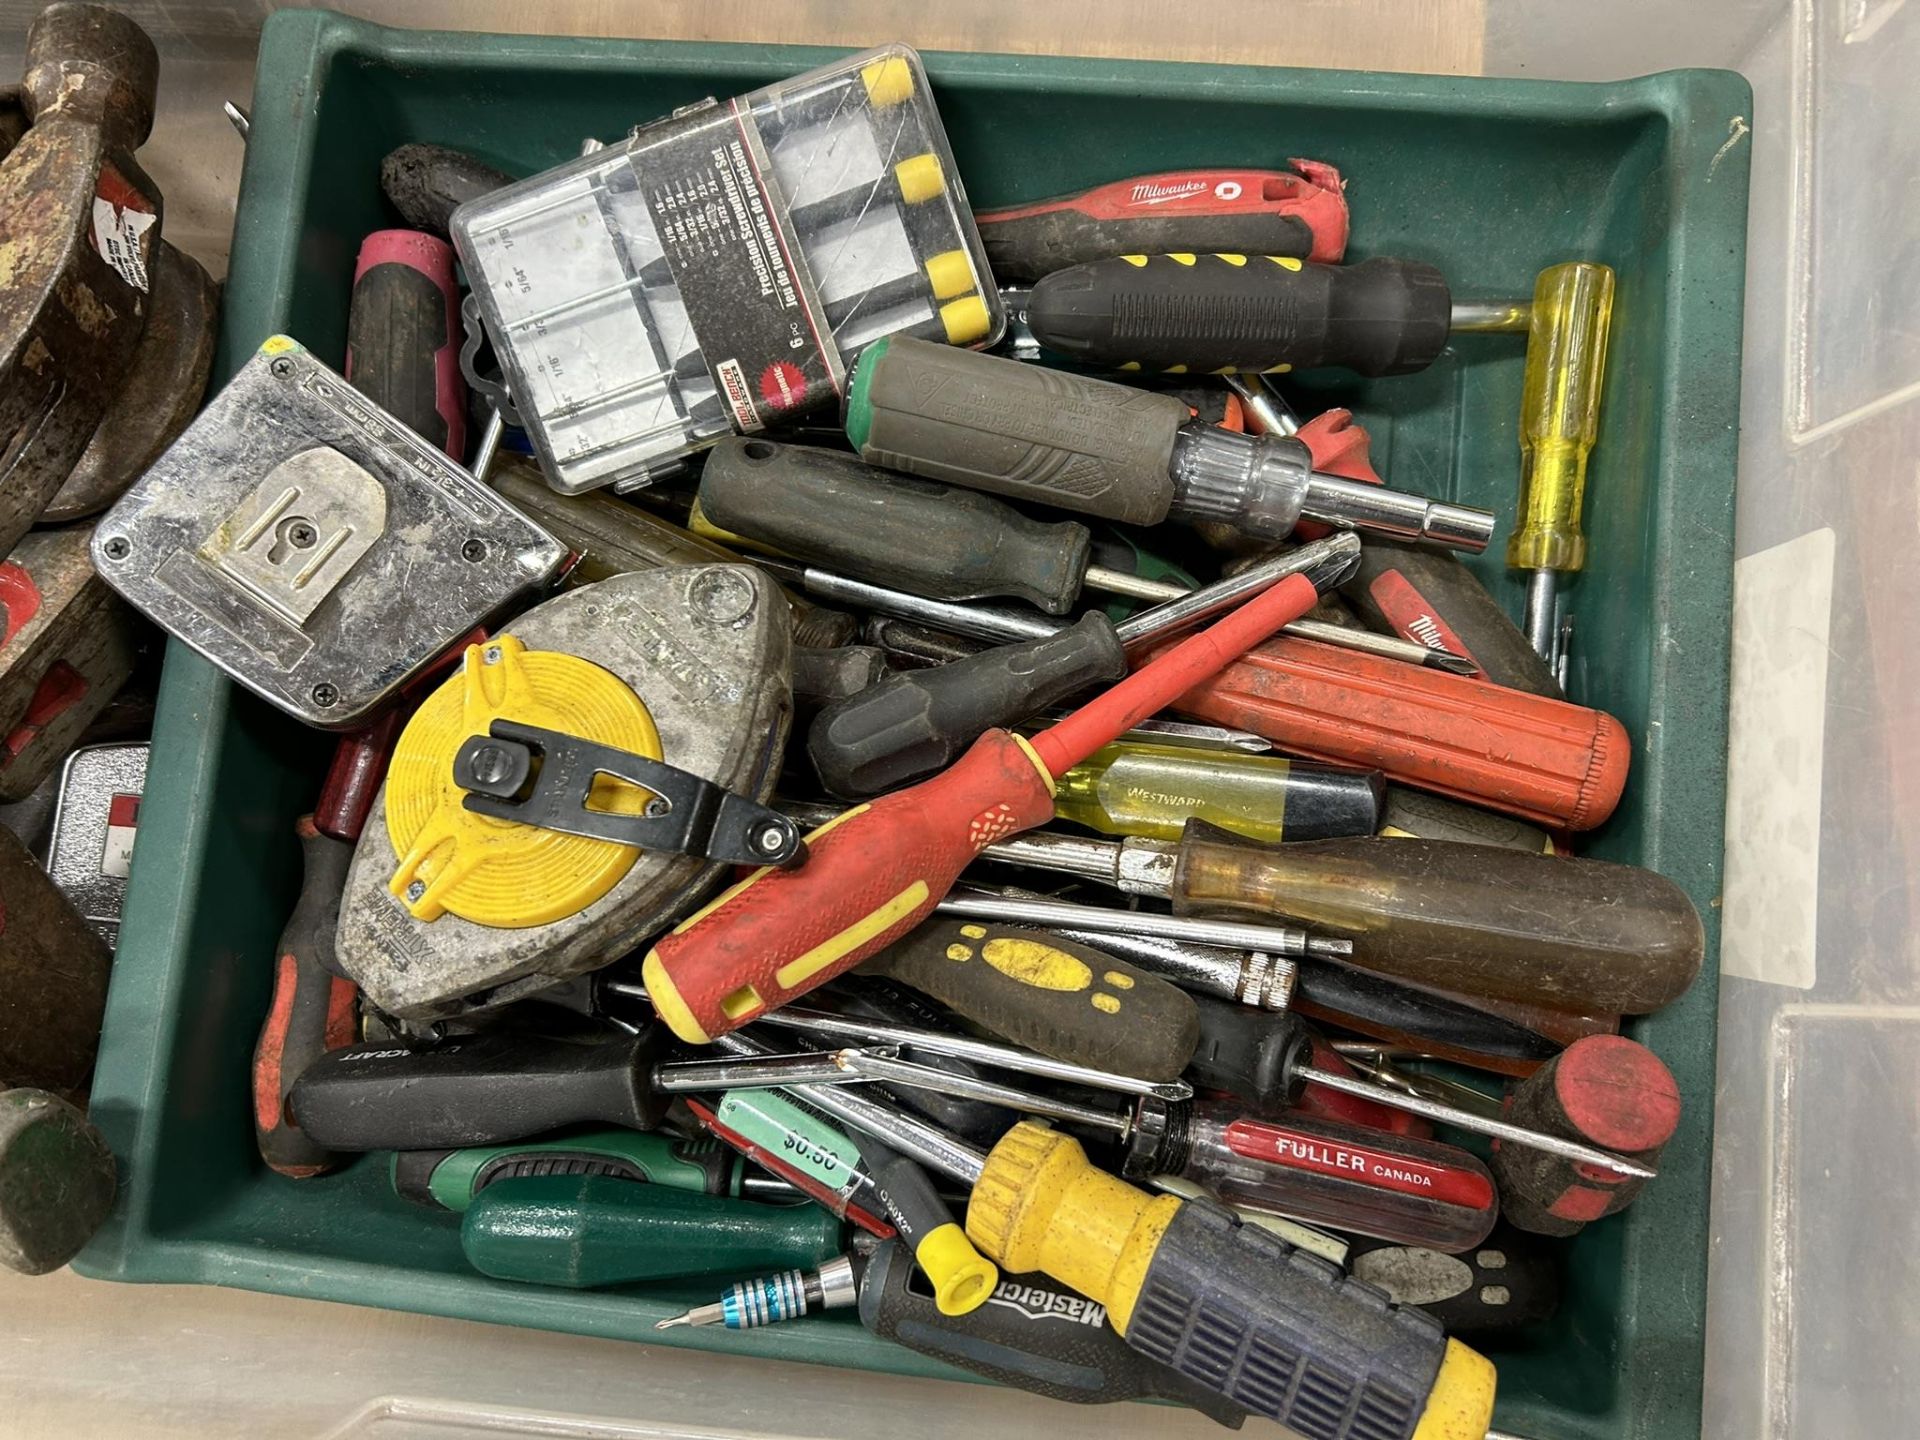 L/O ASSORTED HAMMERS, SCREWDRIVERS, PIPE WRENCHES, ETC. - Image 2 of 3